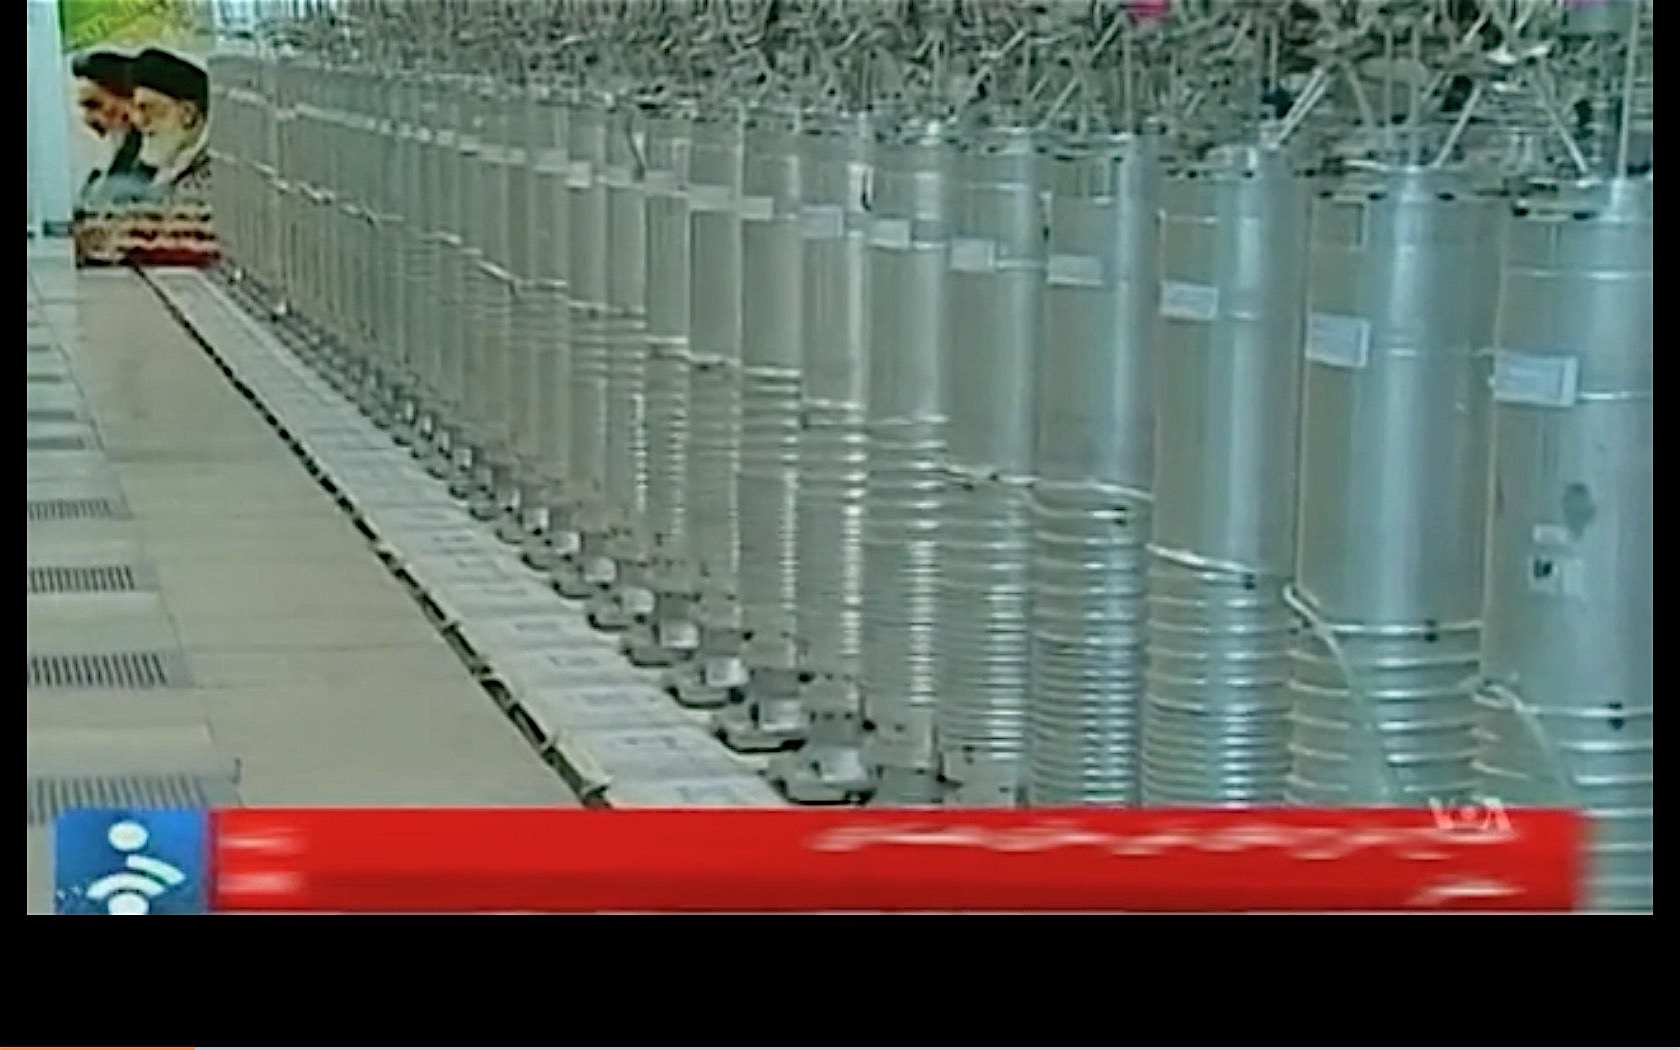 Centrifuges in Iran that are slated for storage under the Iran nuclear deal